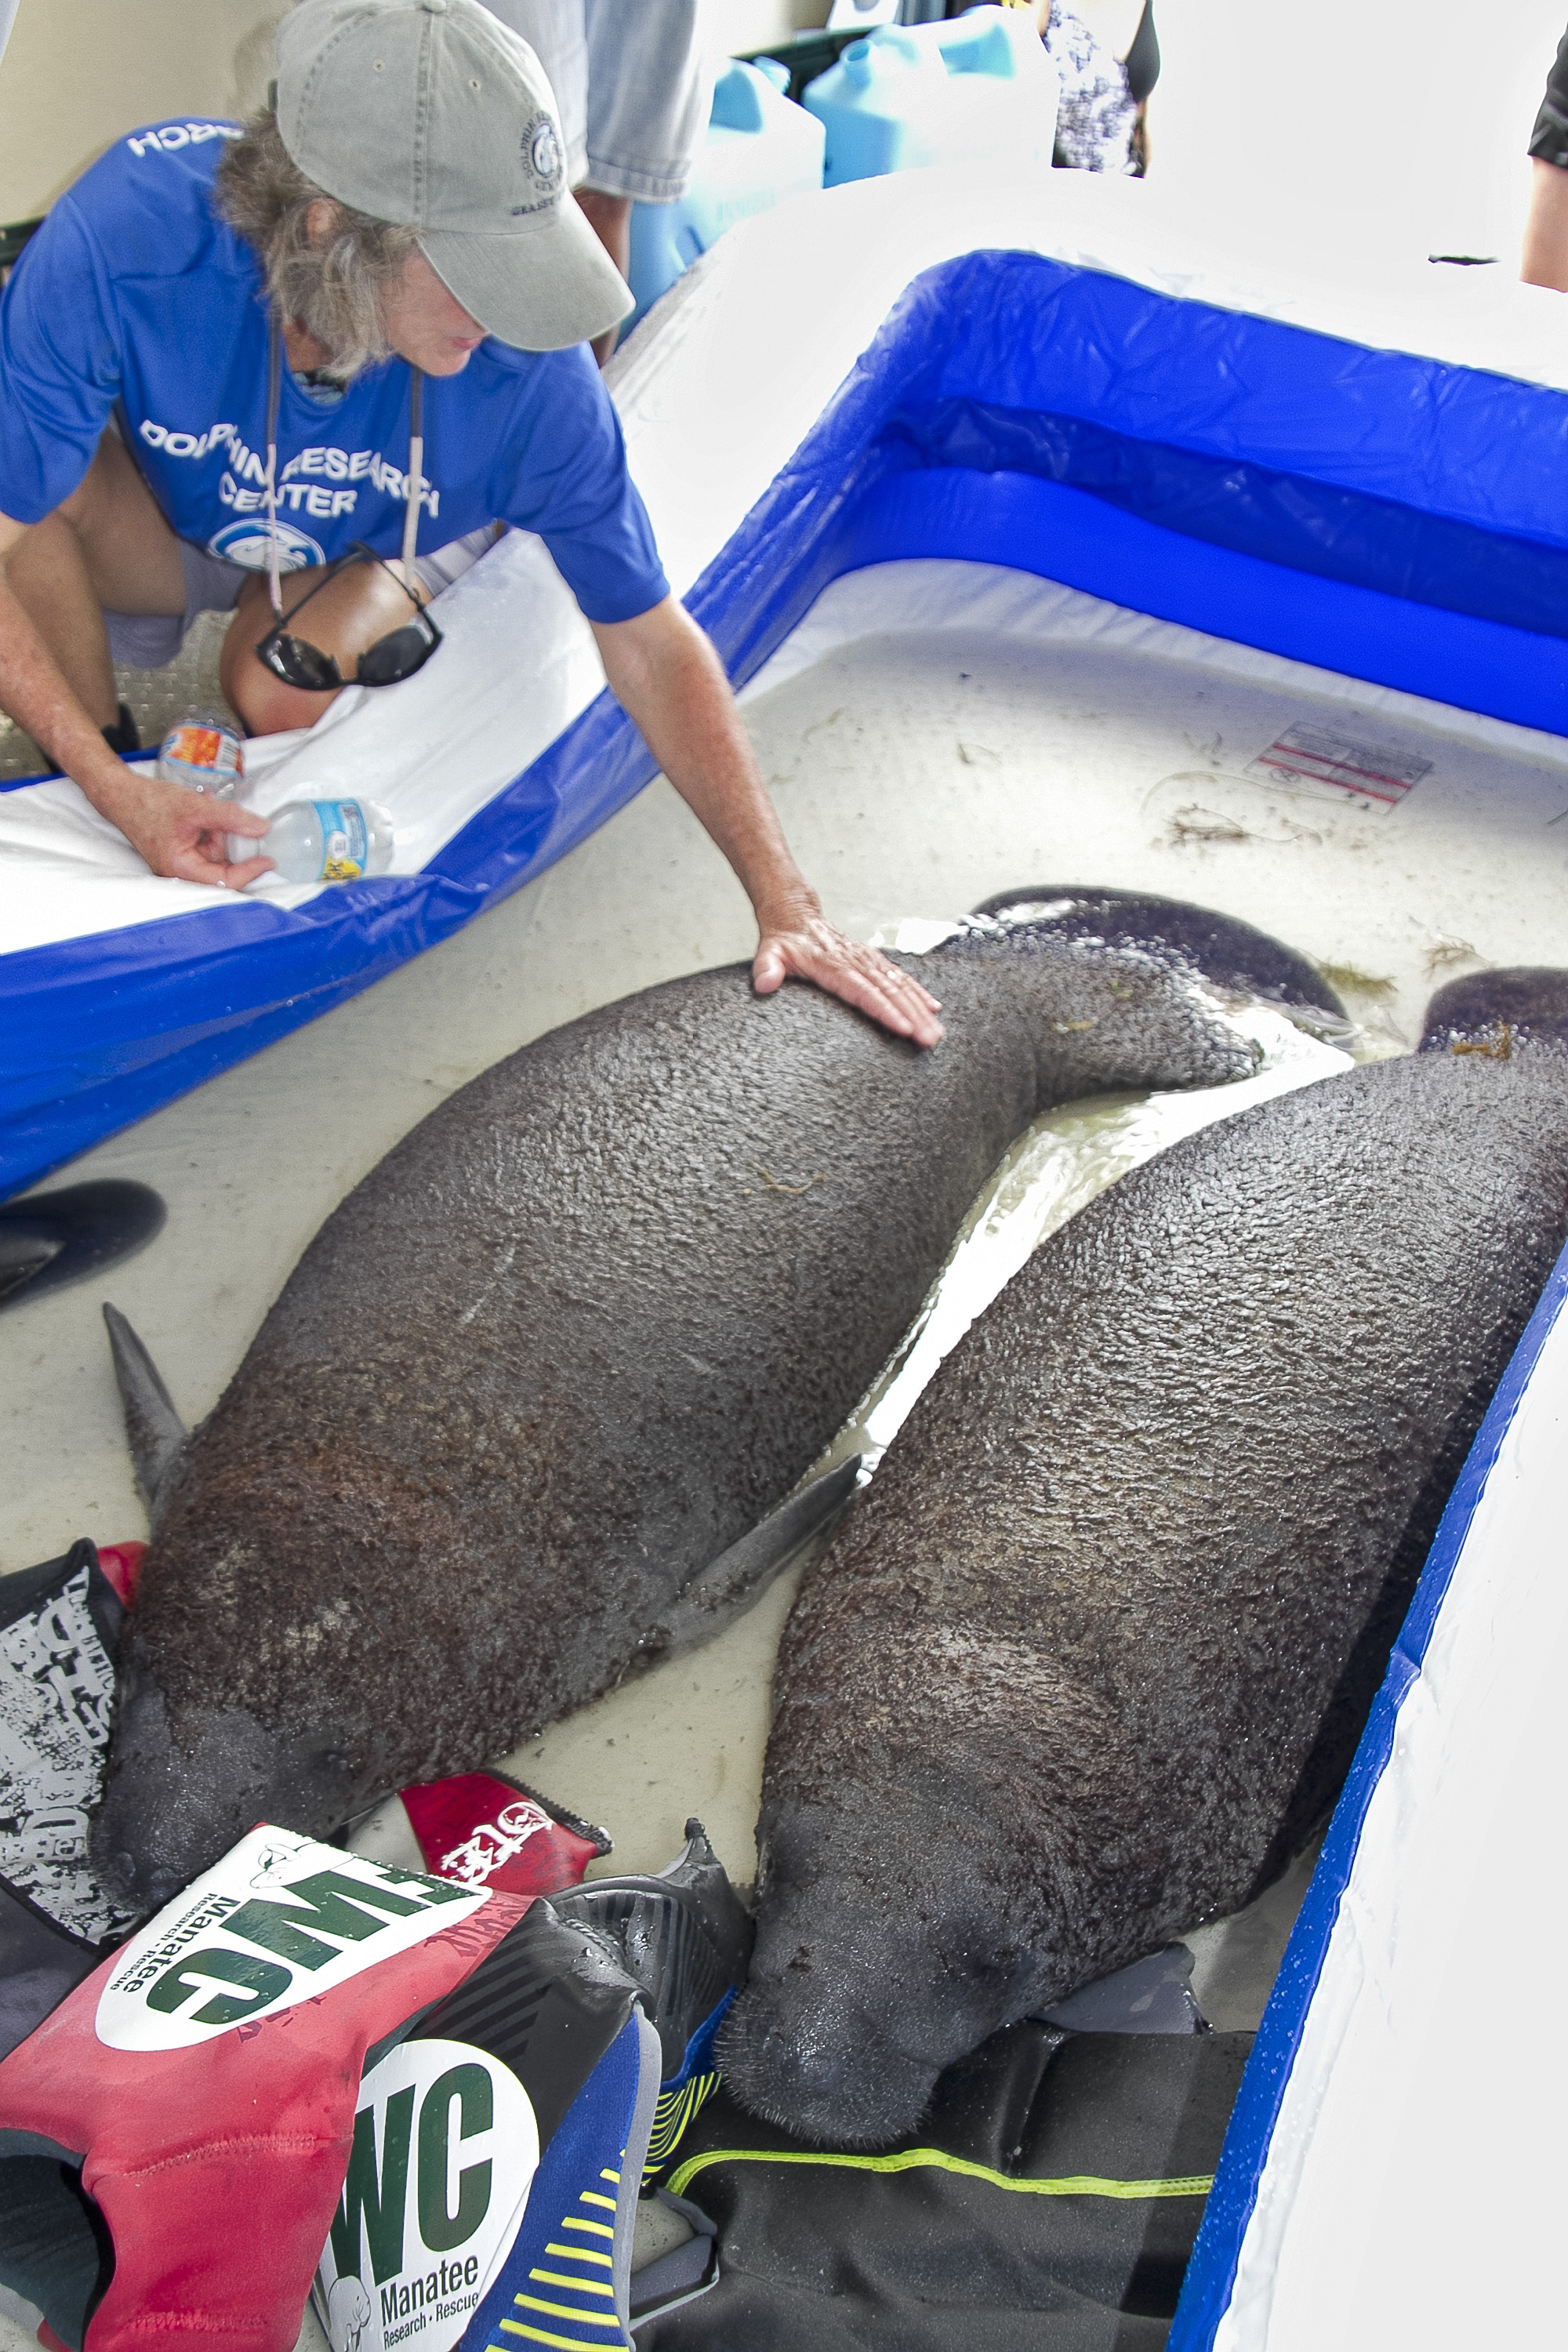 Twin baby manatees were rescued after their mother was killed due to a possible boat strike. (Kara Pascucci/Florida Keys News Bureau/HO)